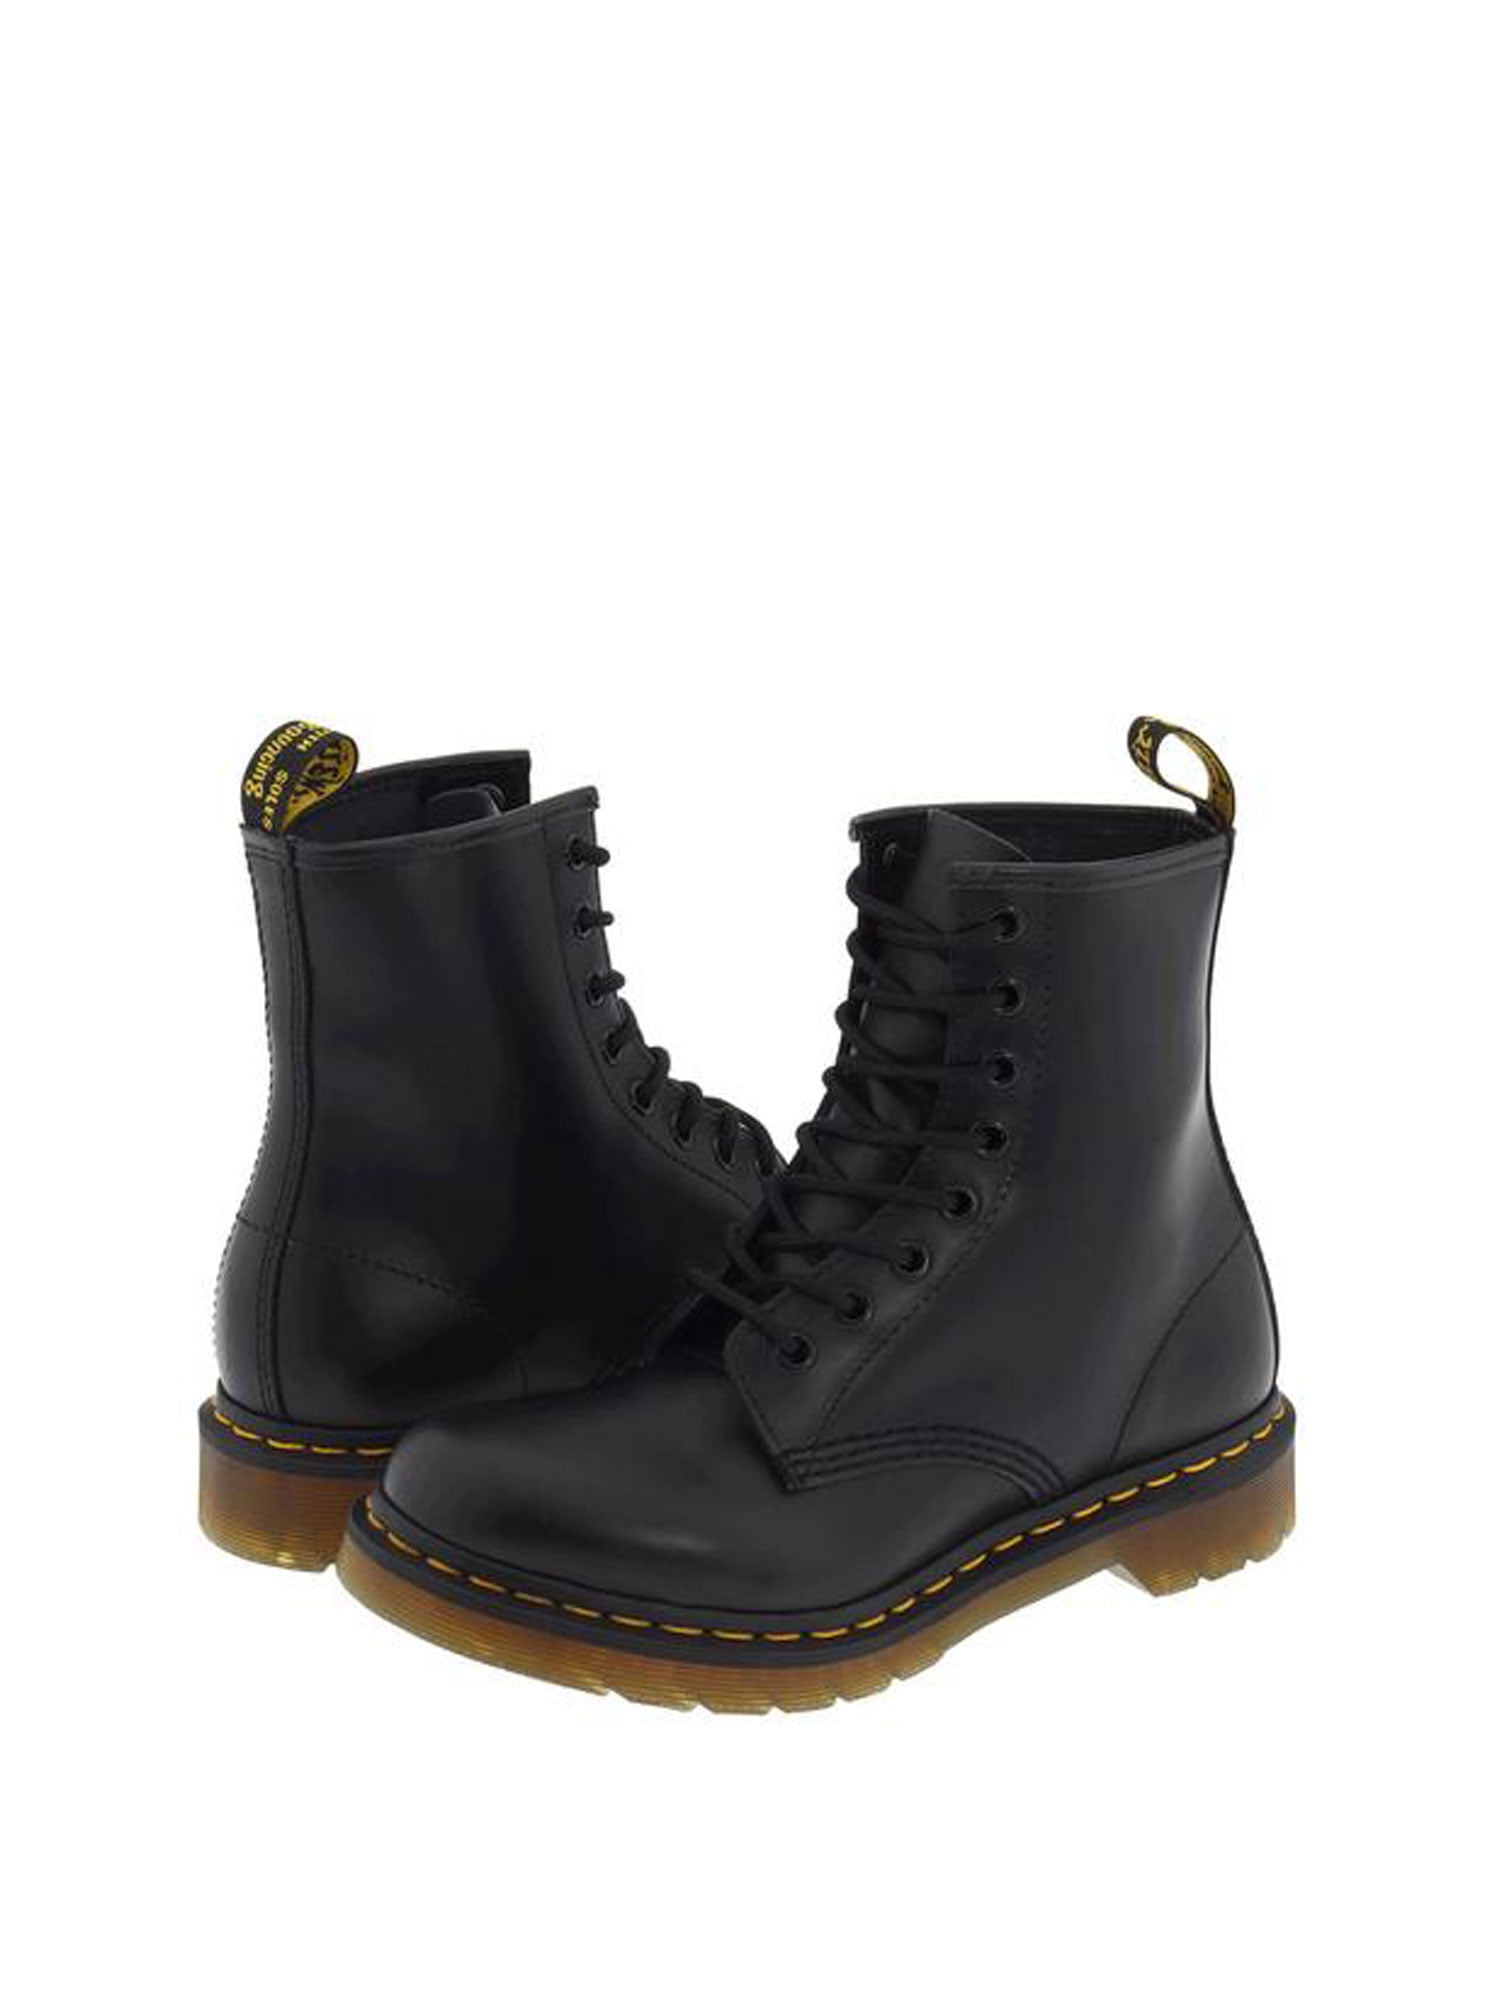 Dr BLACK SMOOTH Martens Women's 1460 8 Eye Leather Boots 11821006 